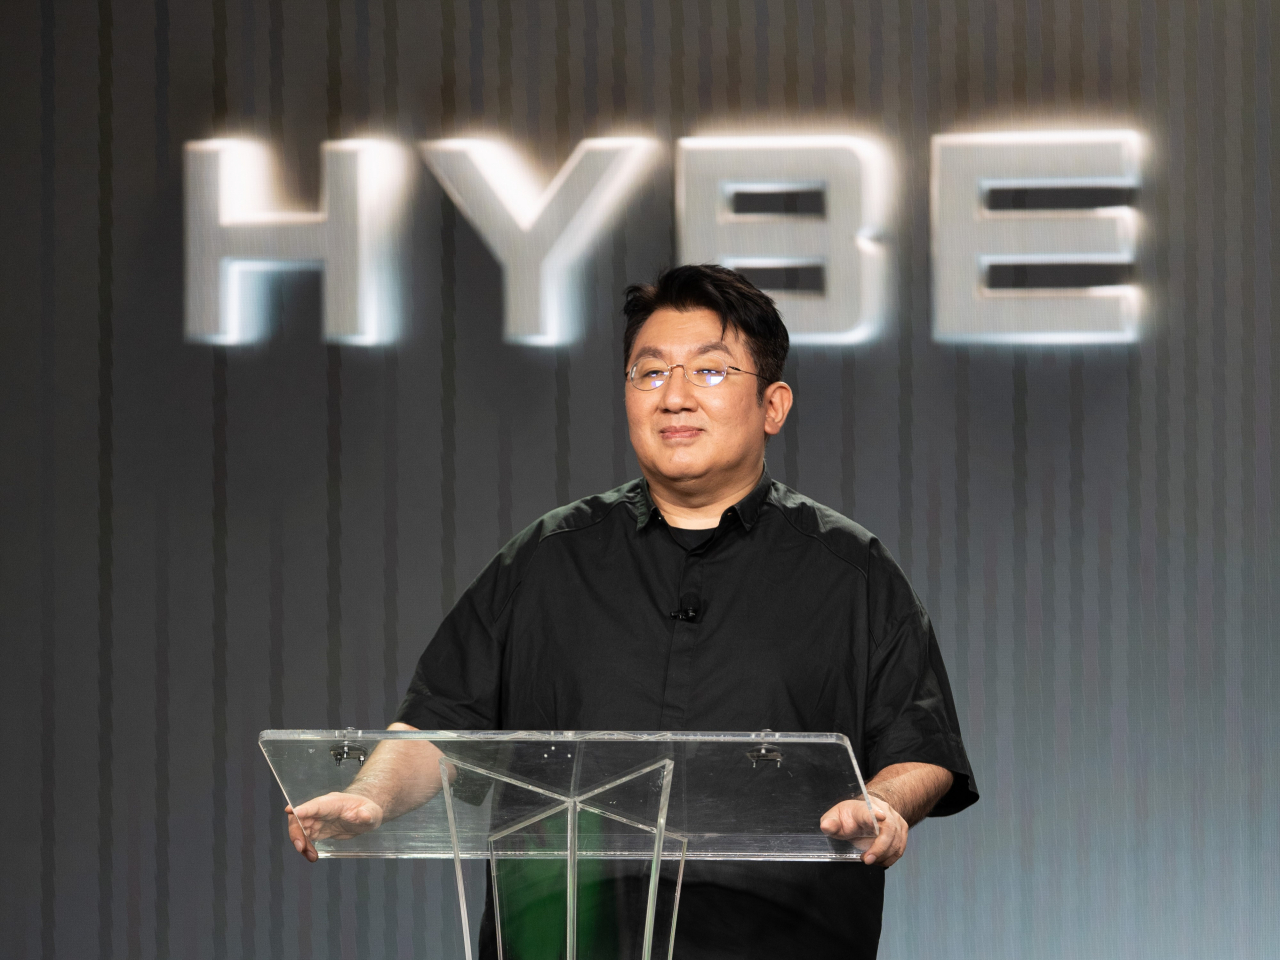 Hybe's founder and chairperson Bang Si-hyuk. (Hybe)